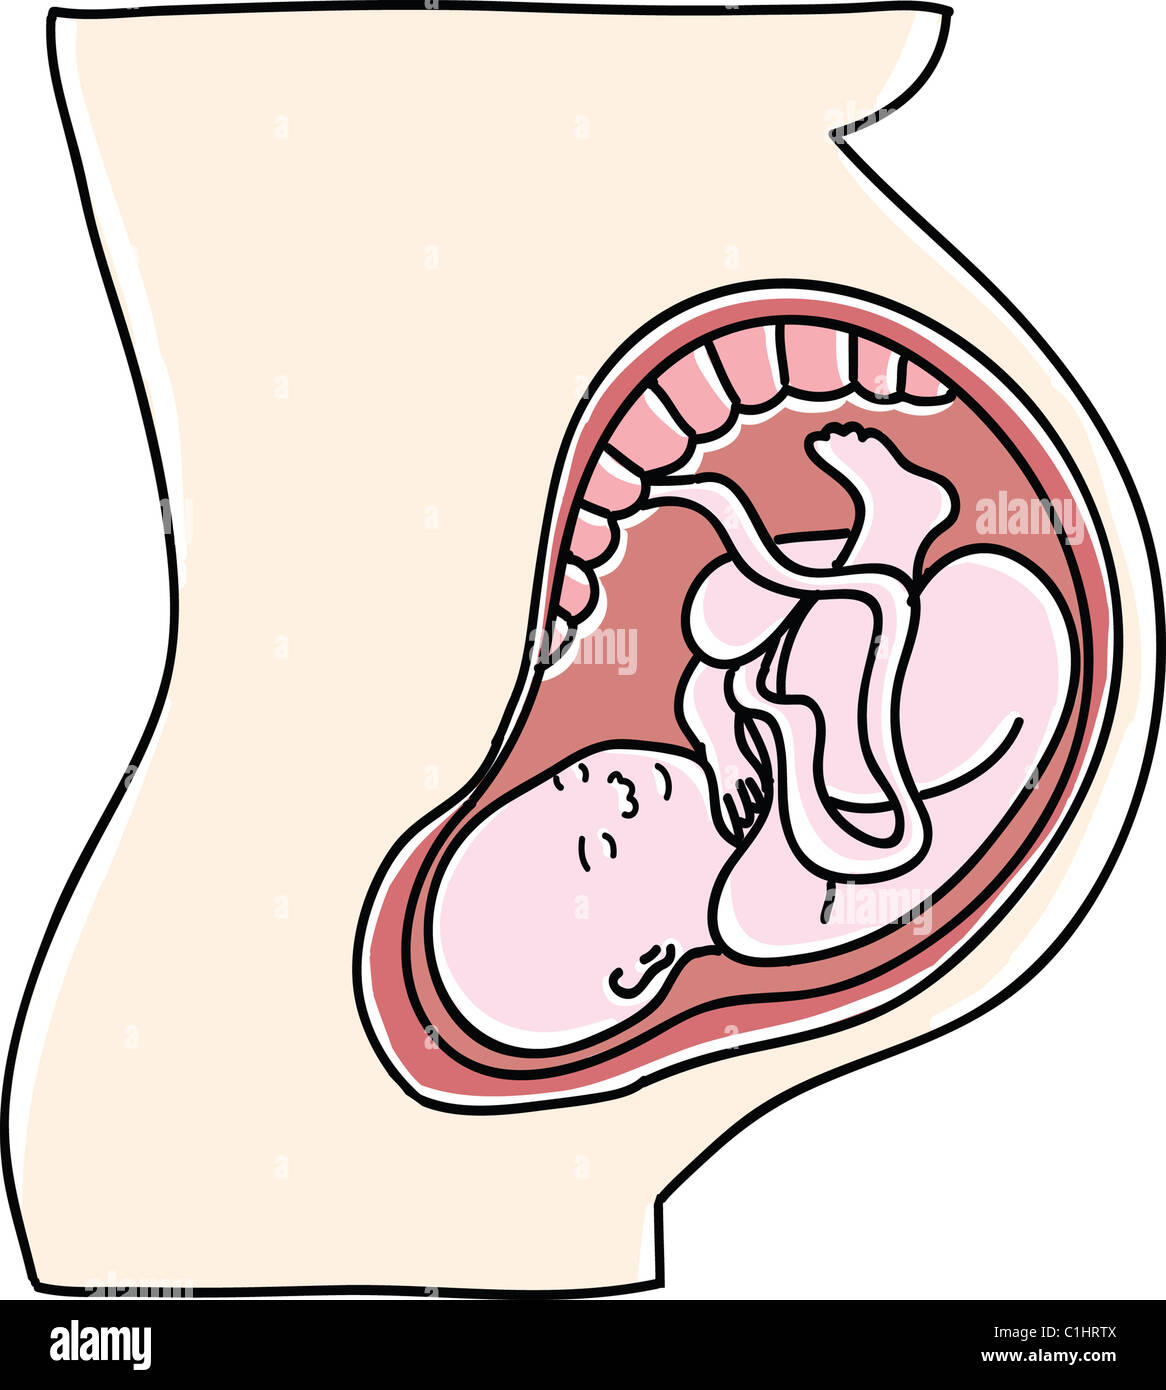 Baby in womb illustration Stock Photo